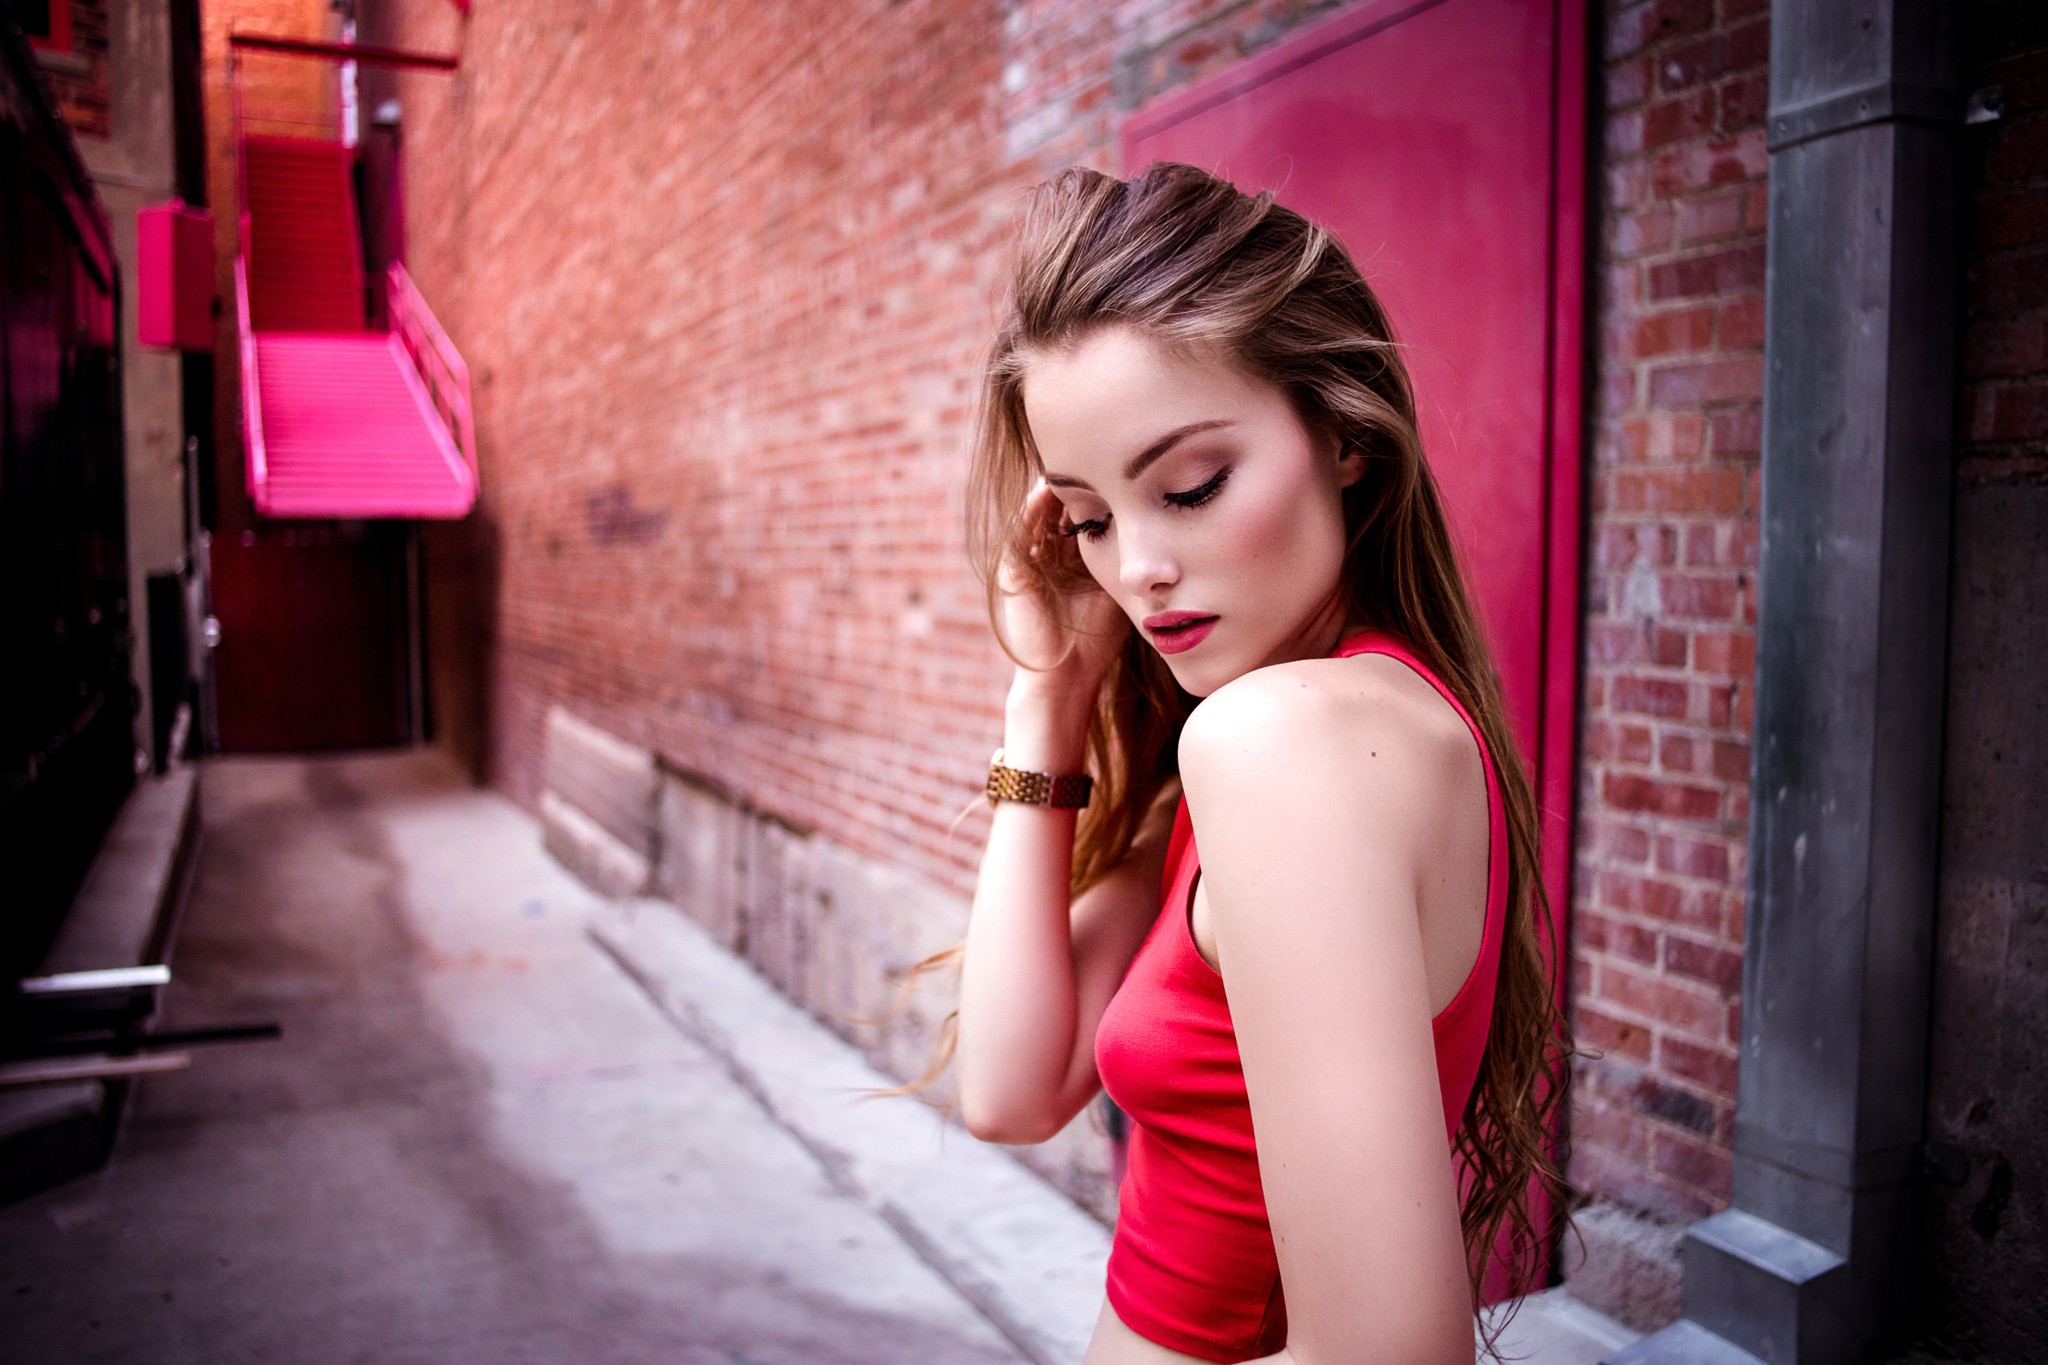 Women April Alleys Portrait April Slough Young Woman One Arm Up Red Tops Looking Below 2048x1365